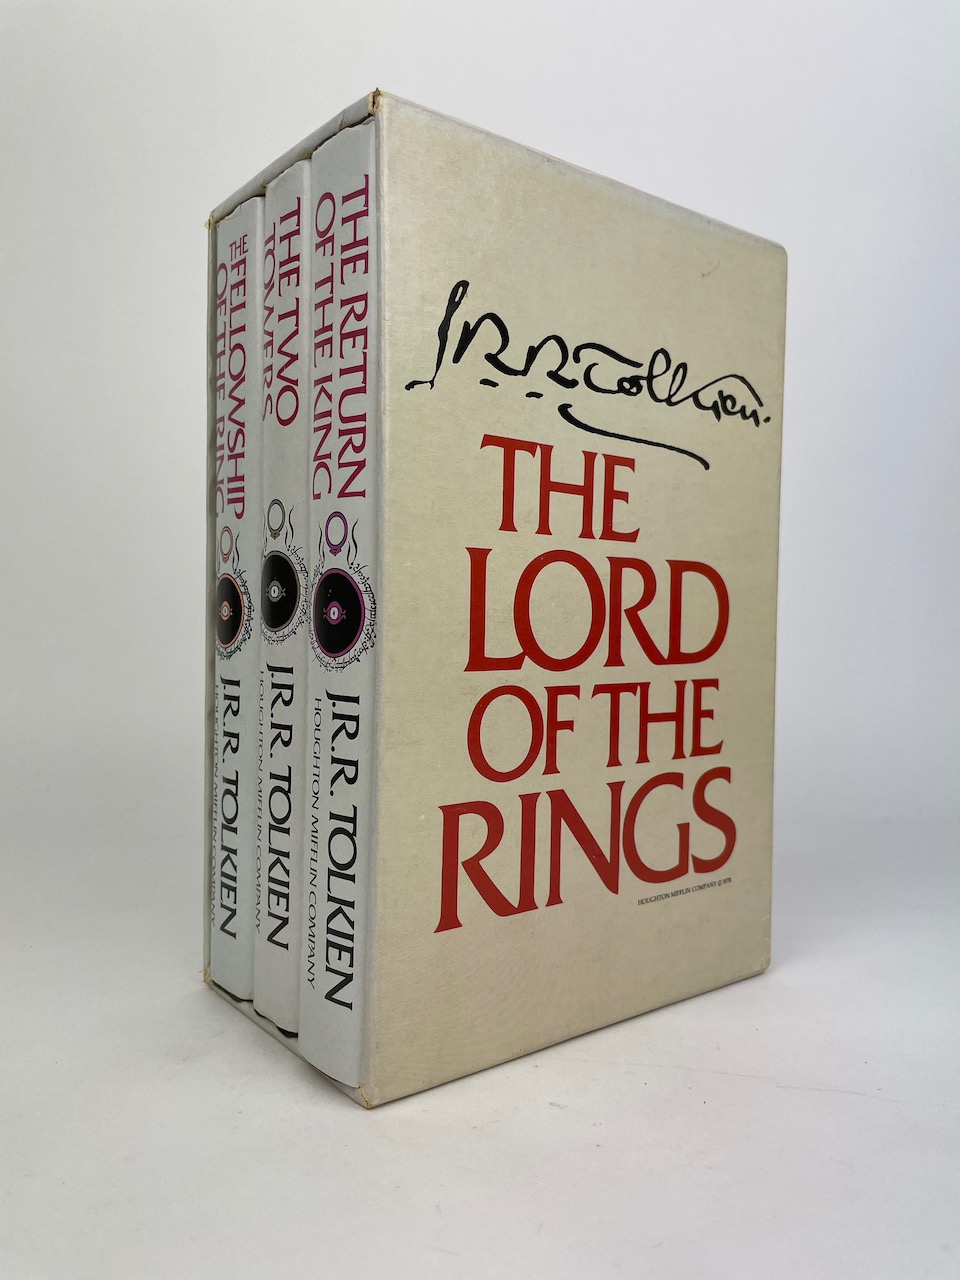 The Lord of the Rings JRR Tolkien Signature set from 1978, by Houghton Mifflin 3